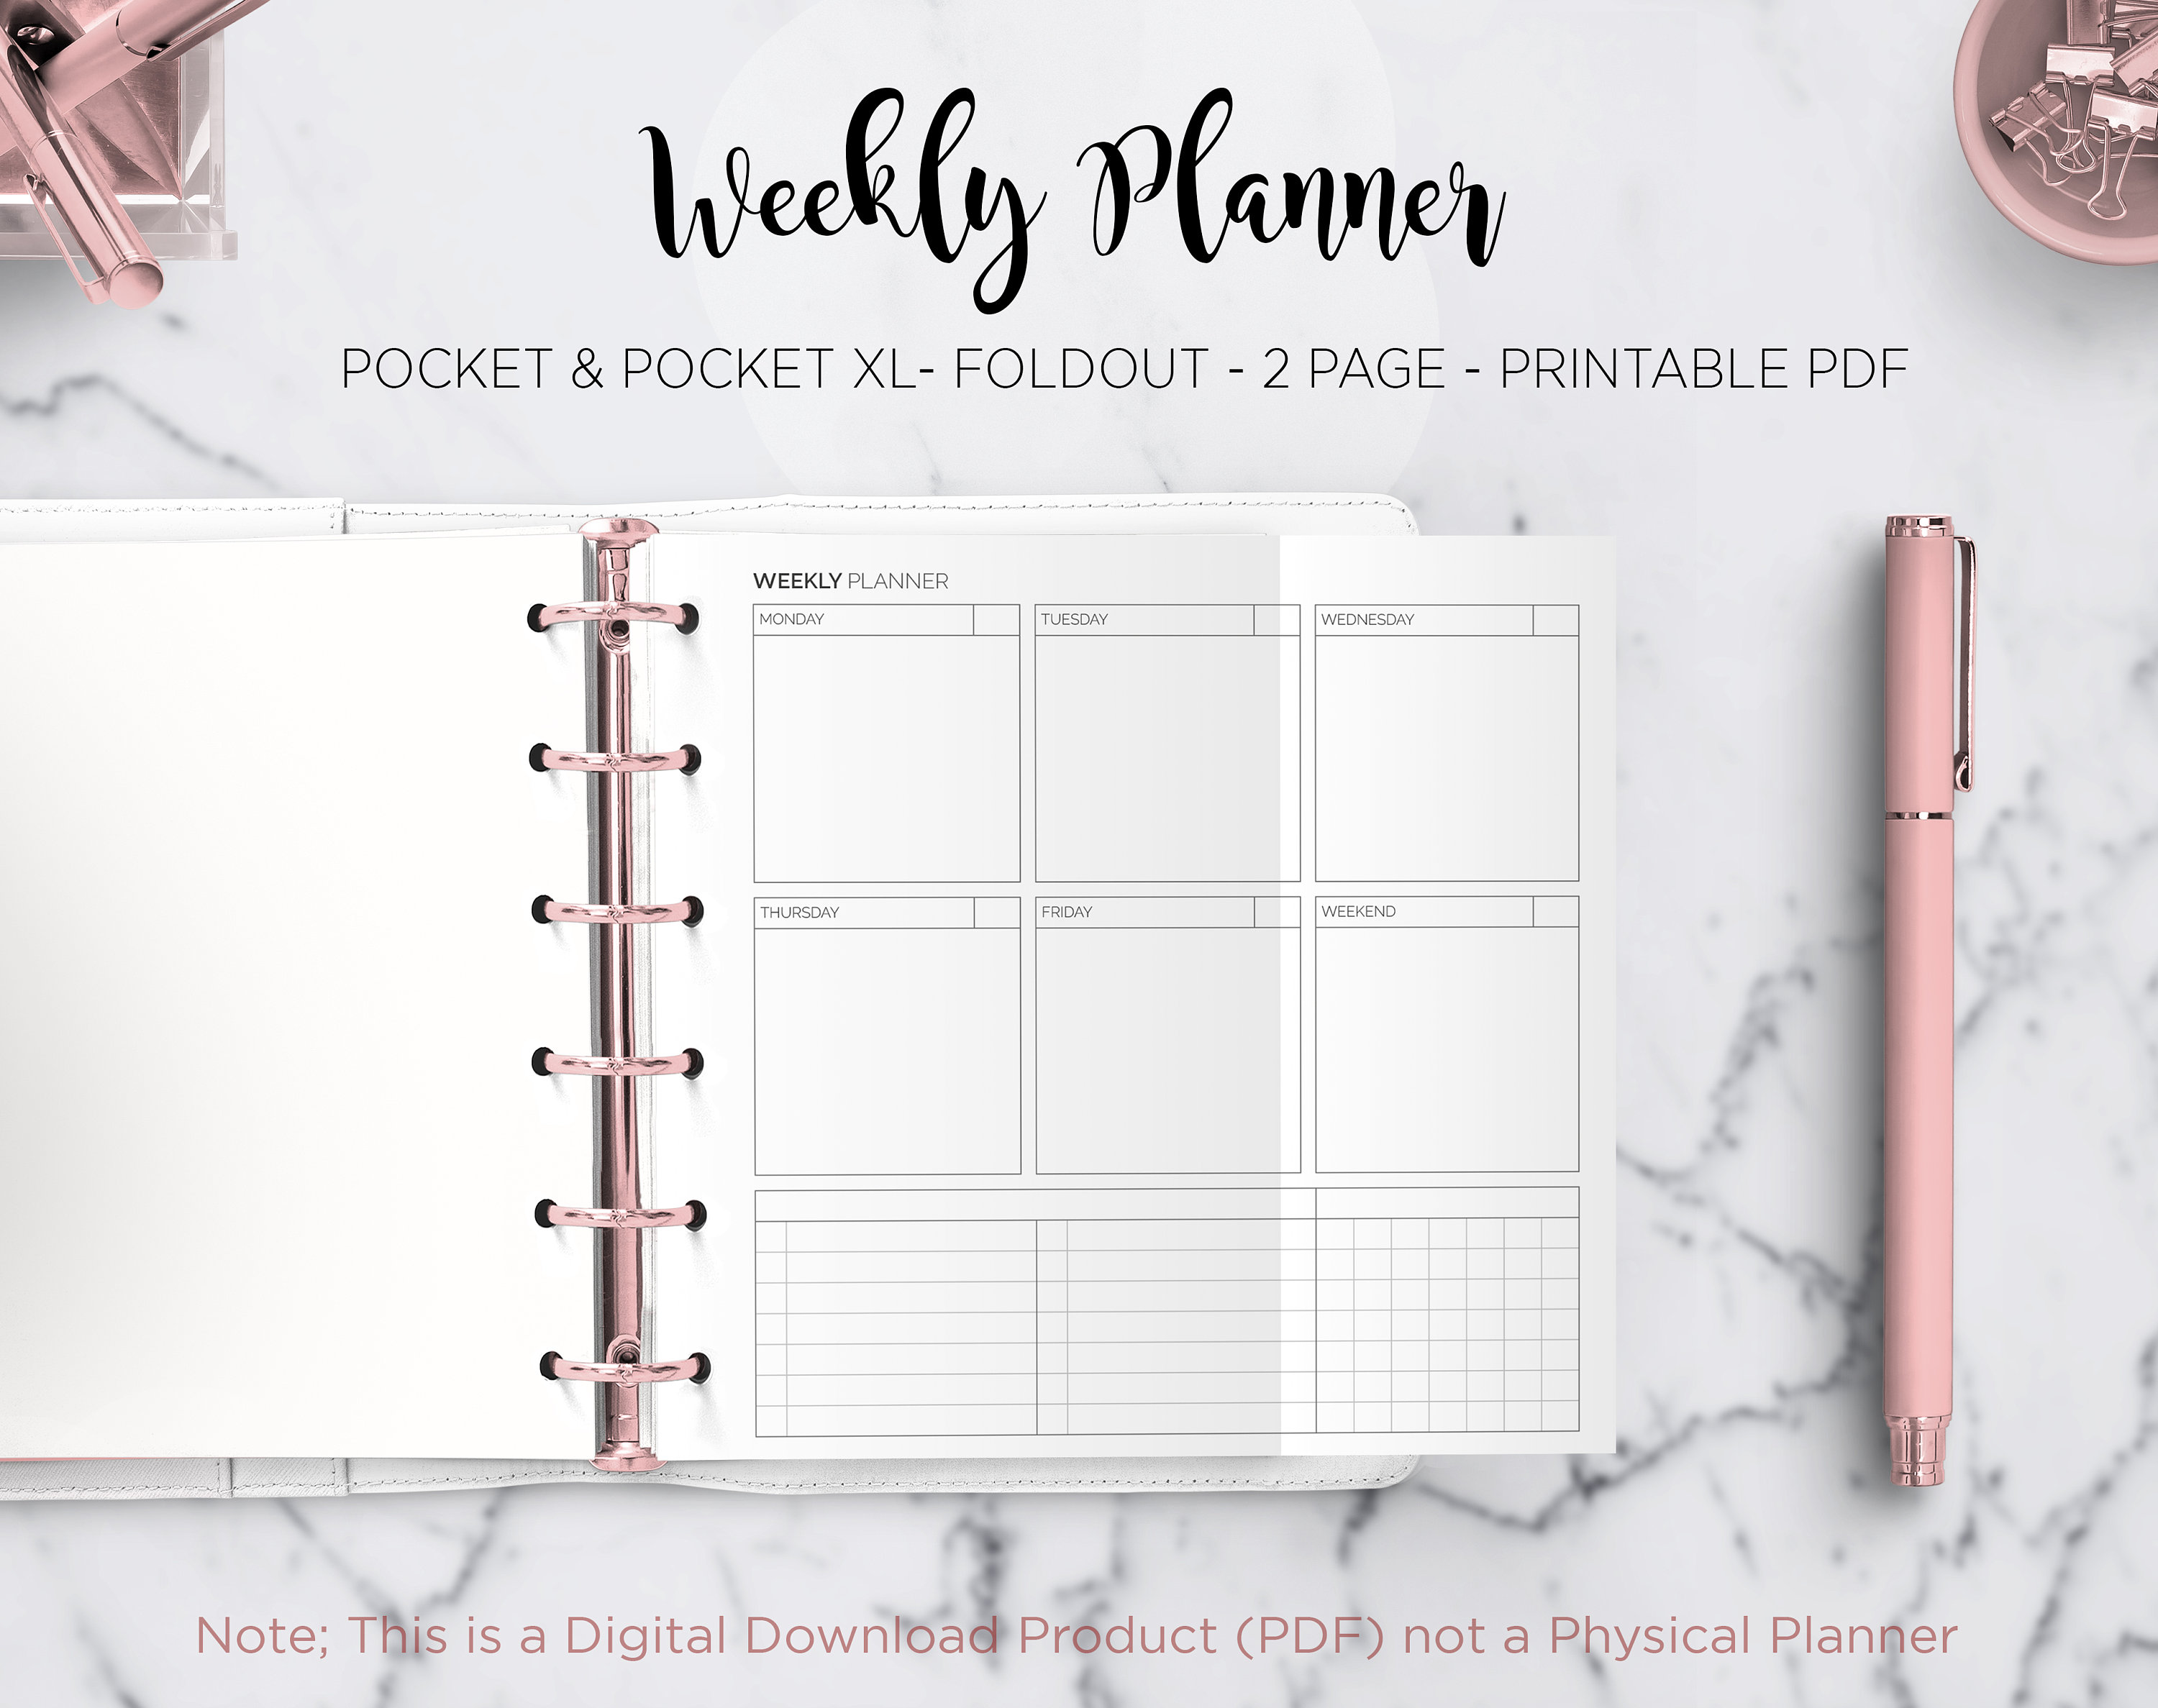  Pocket Menu Planner Planner Insert Refill, 3.2 x 4.7 inches,  Pre-Punched for 6-Rings to Fit Filofax, LV PM, Kikki K, Moterm and Other  Binders, 30 Sheets Per Pack : Handmade Products